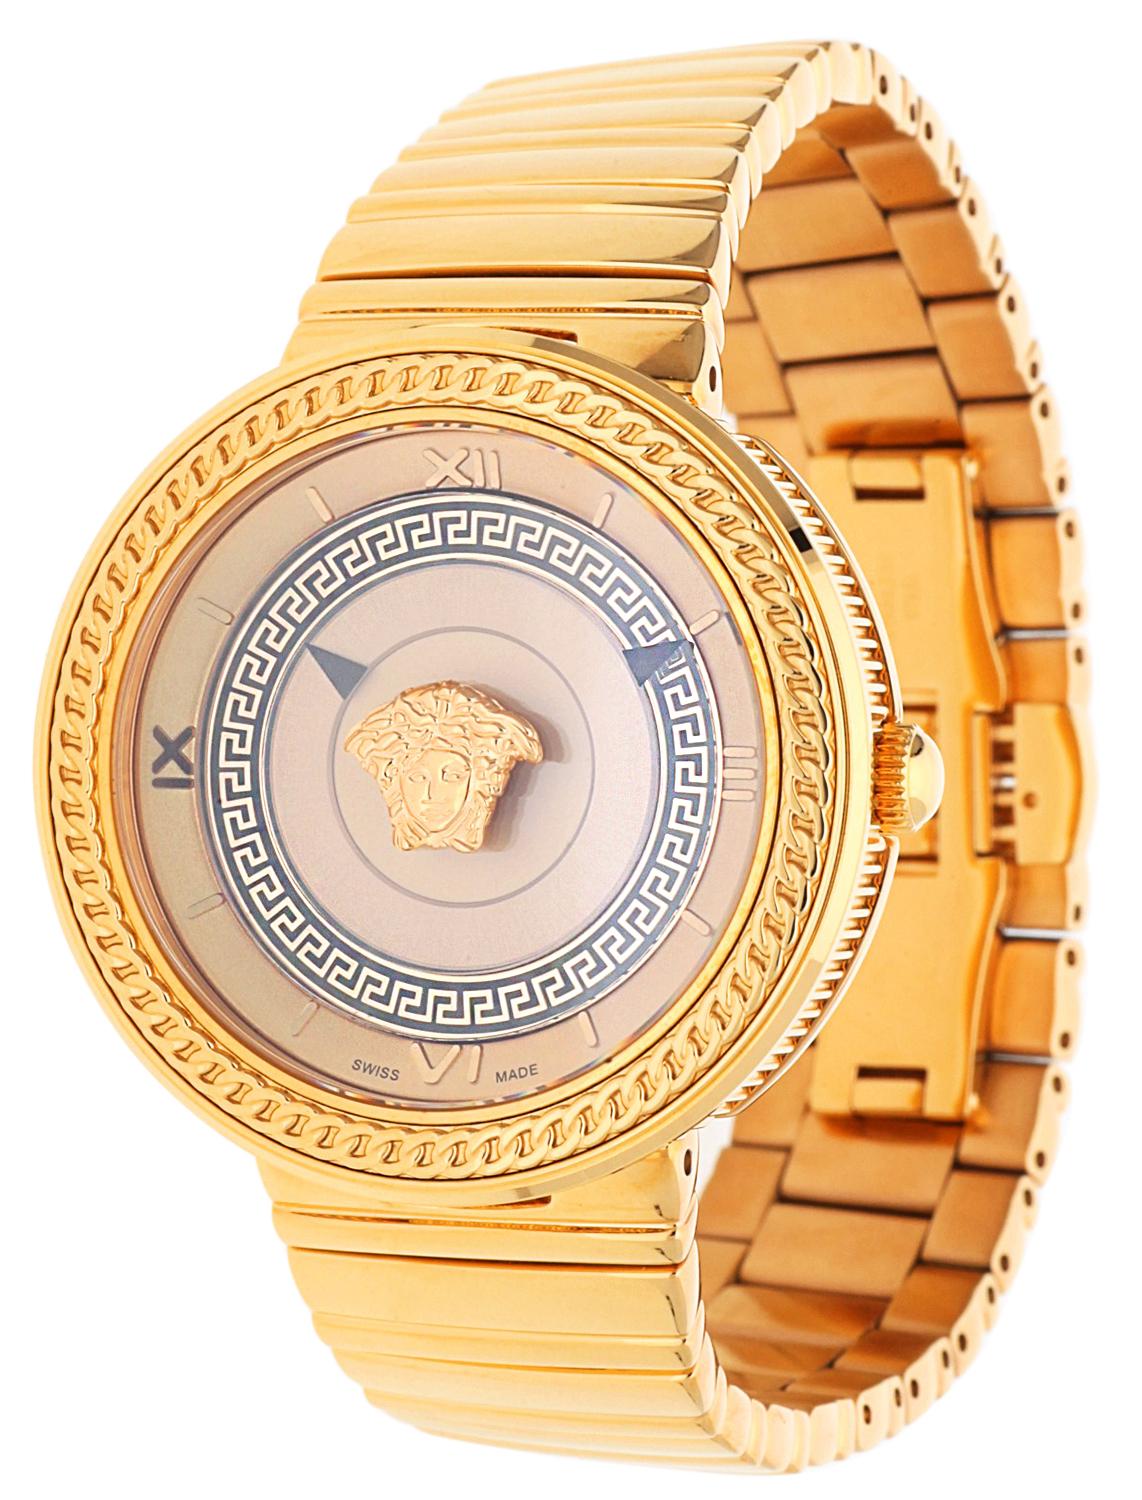 Women's Versace Women Watch V-METAL ICON pink gold VLC090014 For Sale